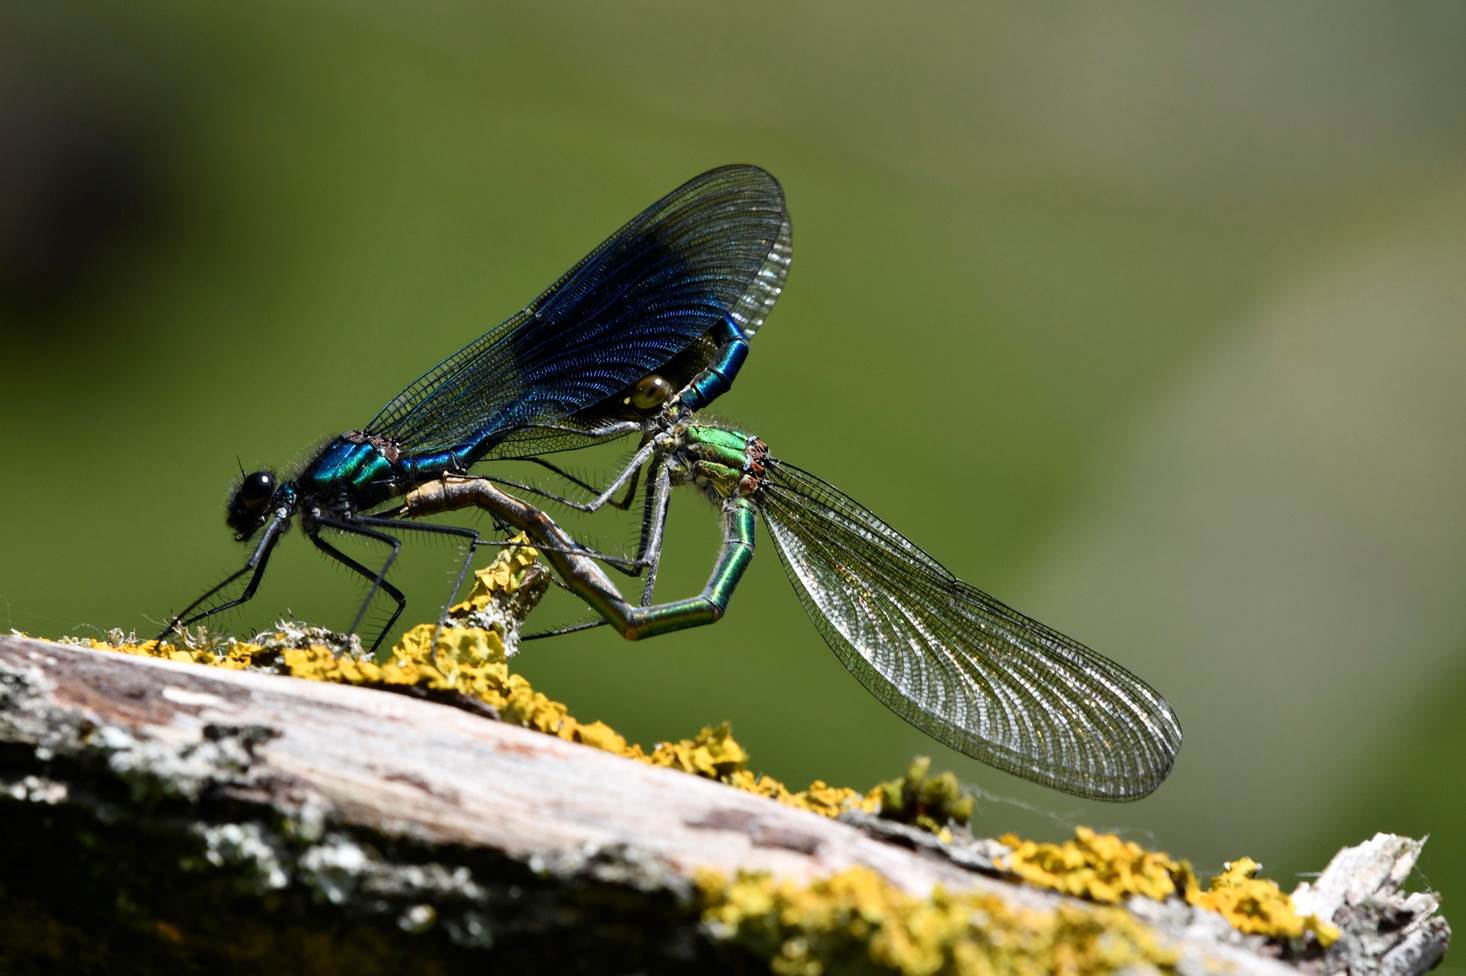 A dragonfly mating on a branch

Description automatically generated